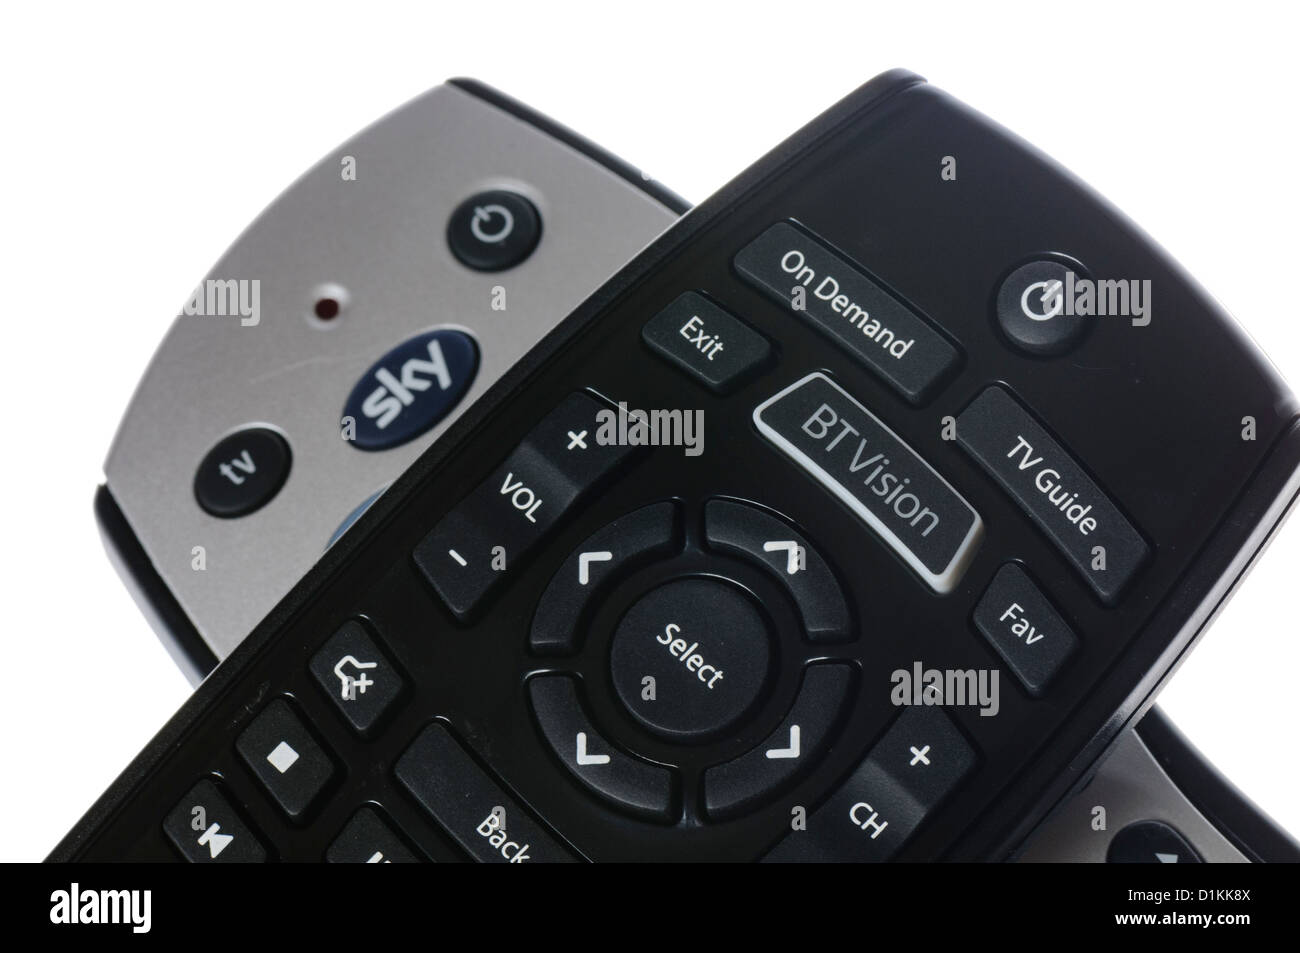 BT Vision and Sky+ remote controls Stock Photo